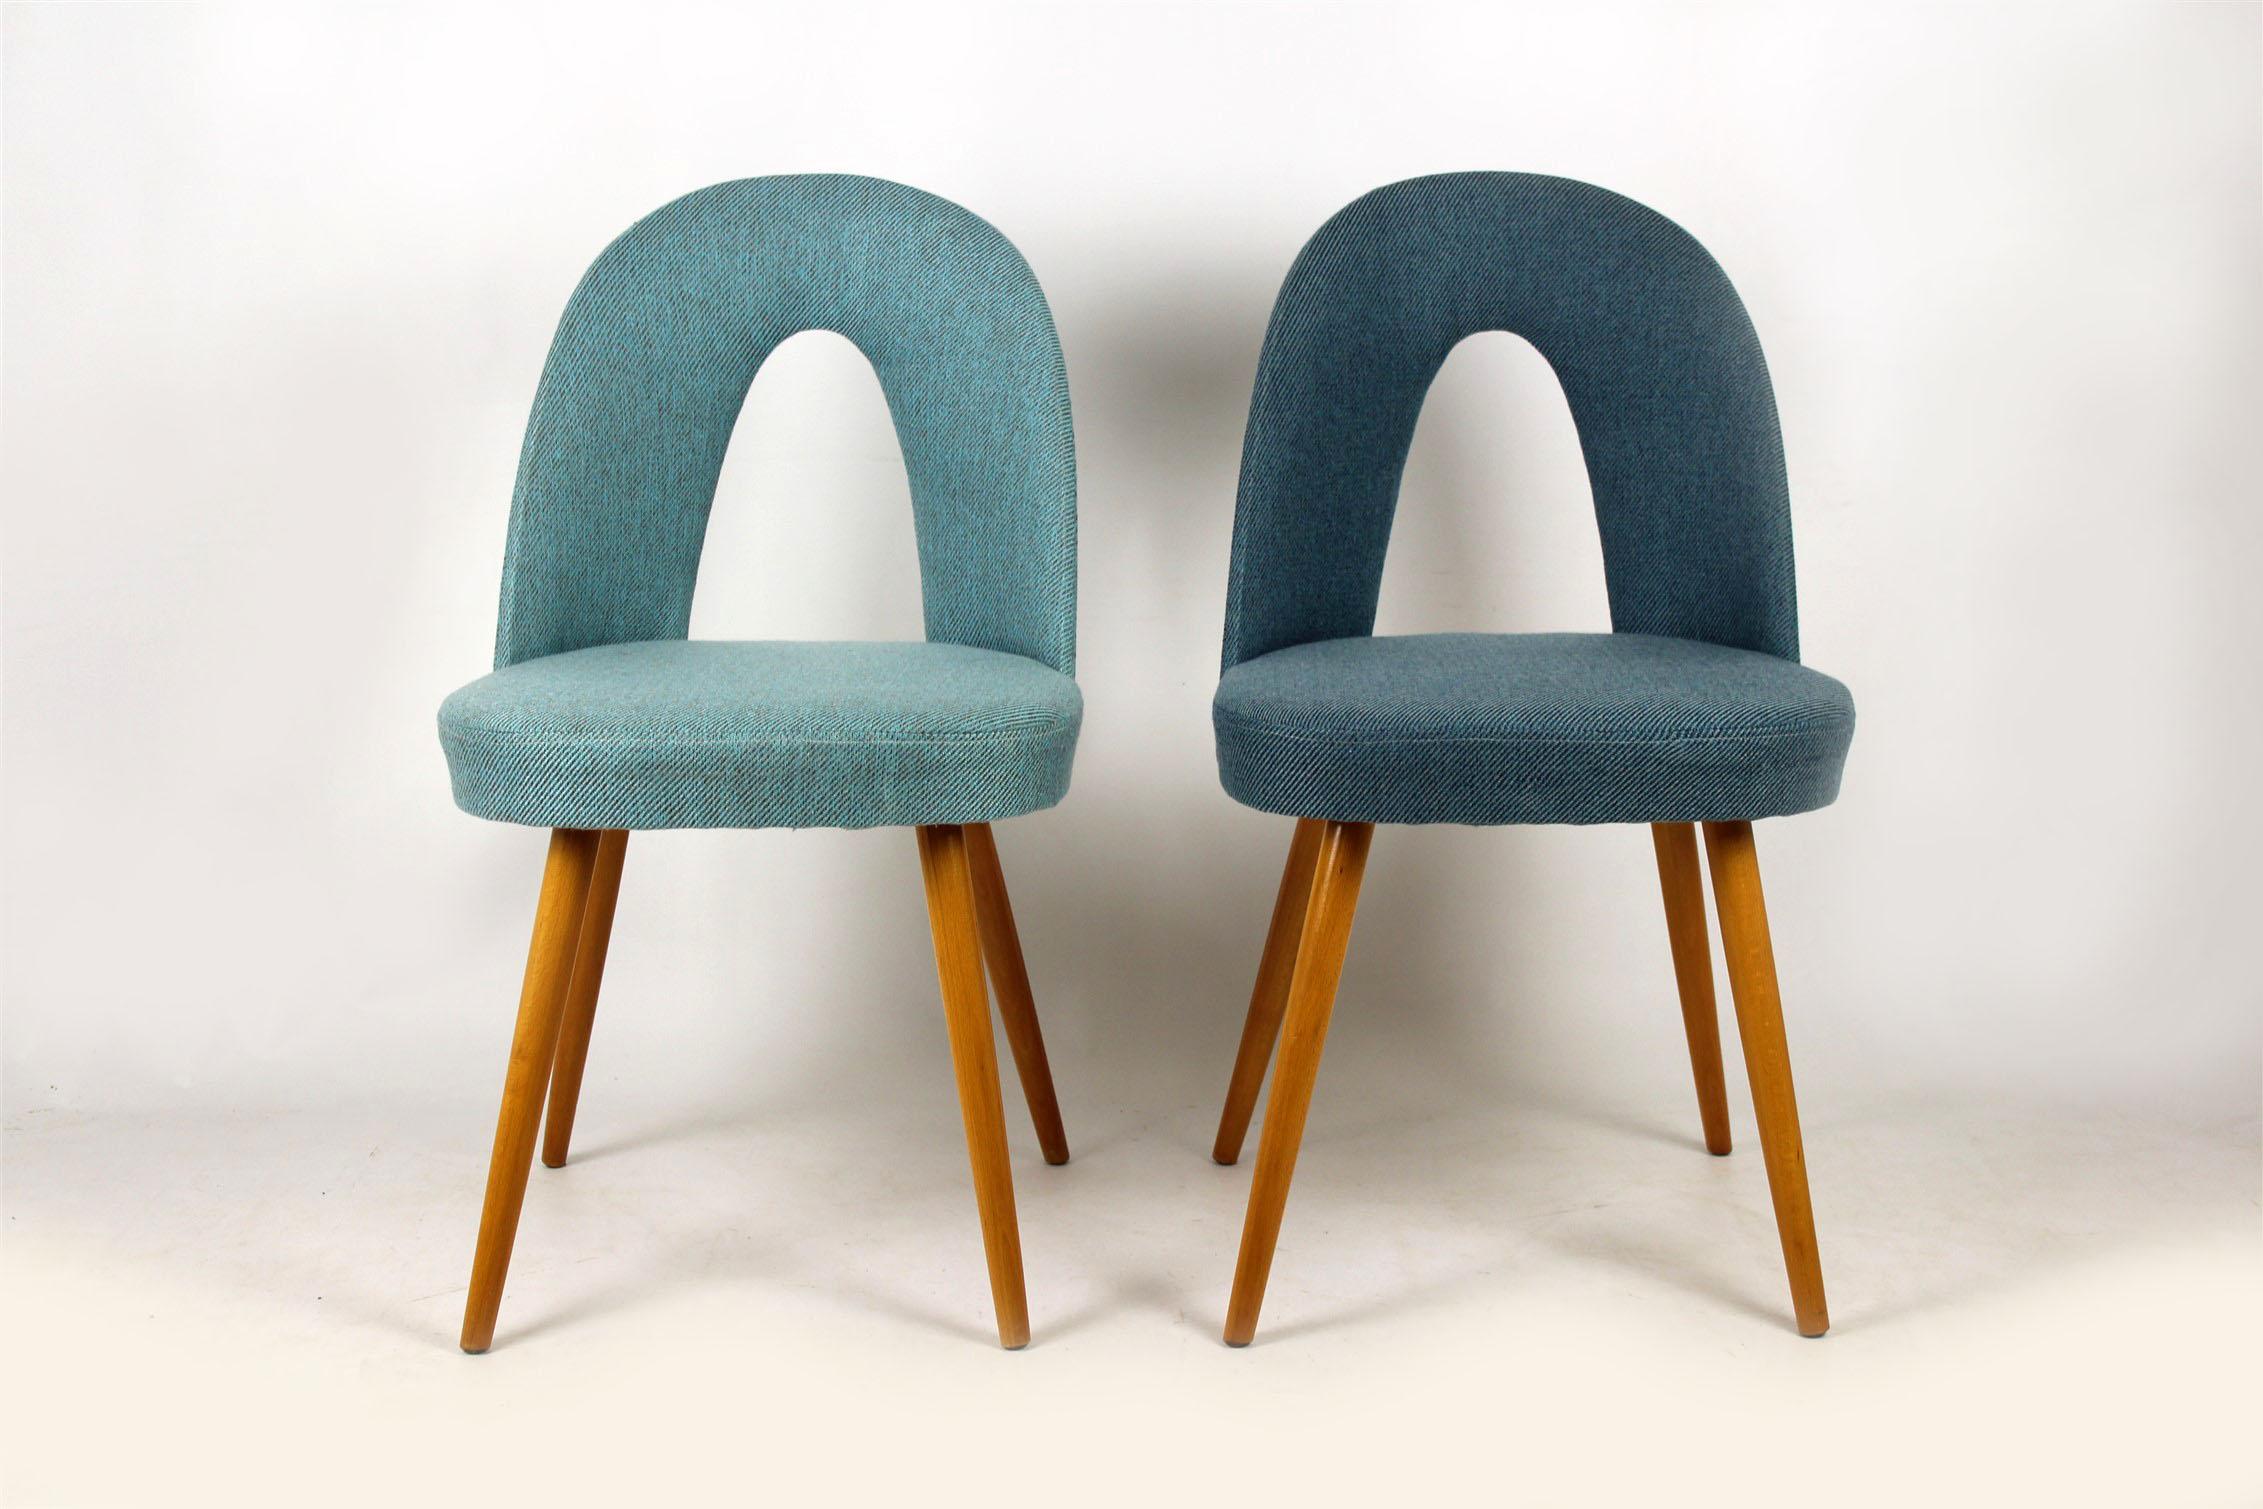 Set of two chairs produced, circa 1960 in former Czechoslovakia. Designed by Antonin Suman for Zapadoslovenske Nabytkove Zavody. Upholstered in new blue and turquoise fabric upholstery.